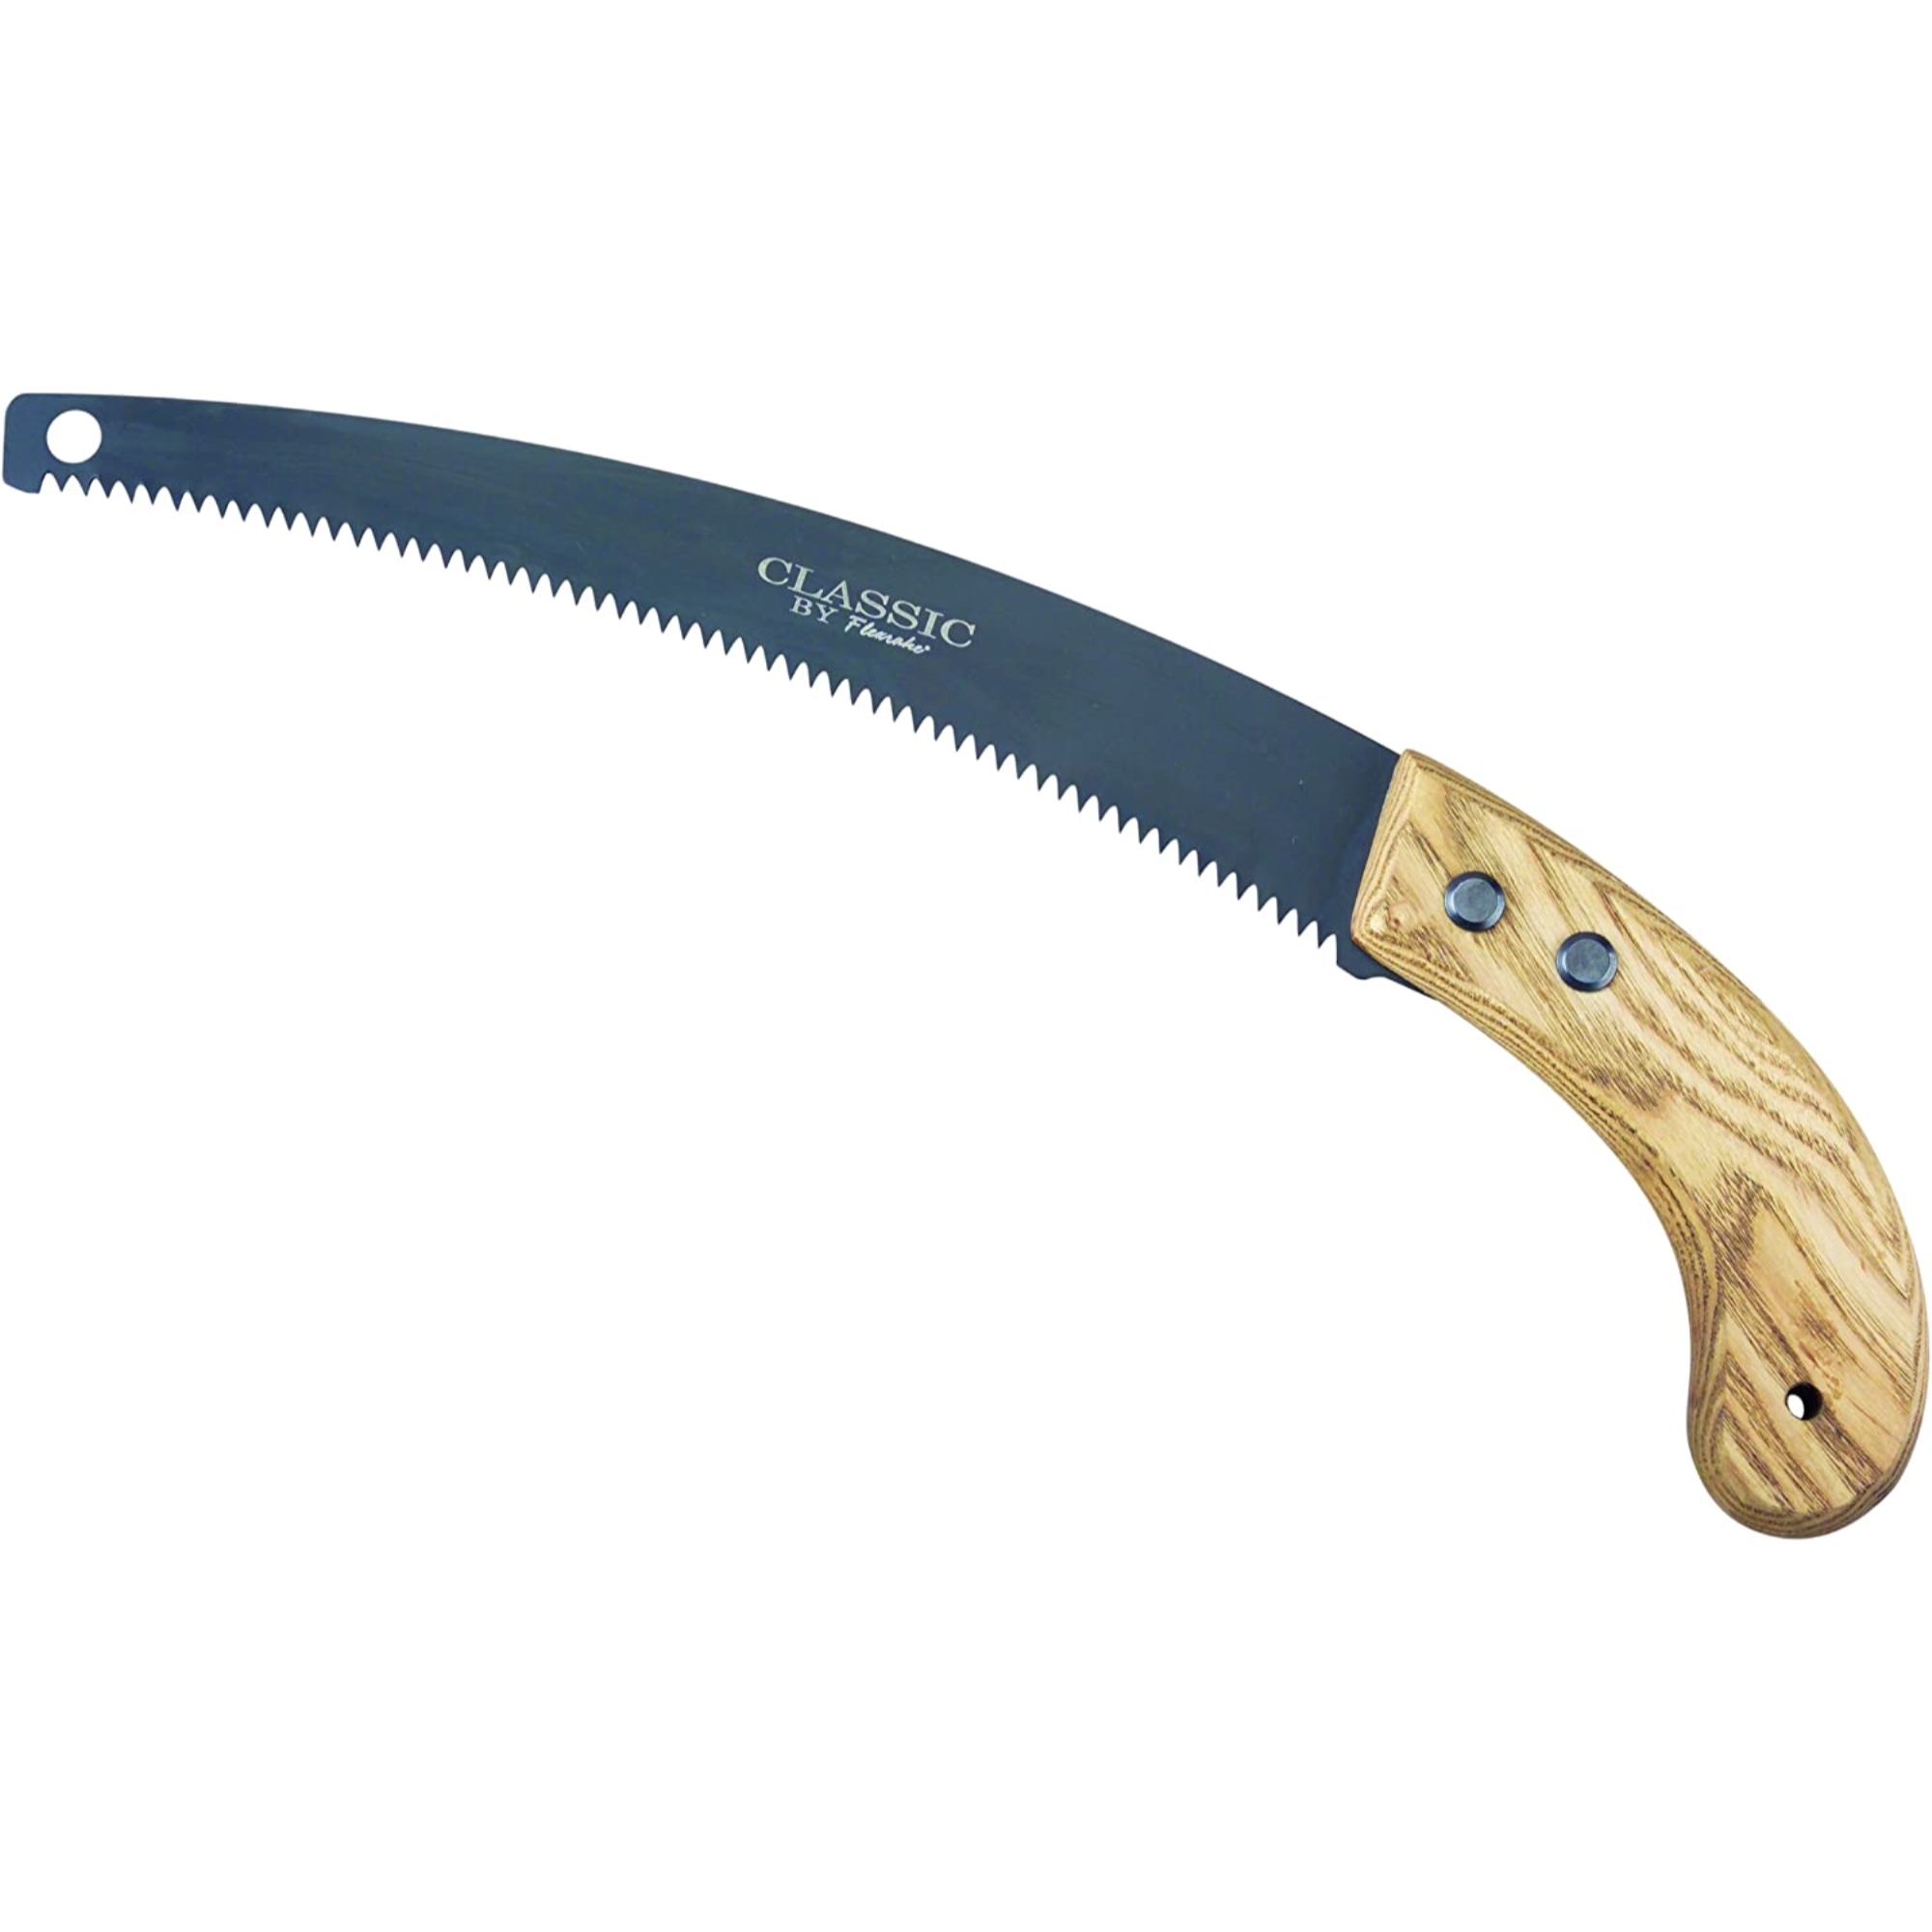 Flexrake Classic Pruning Saw - image 1 of 2